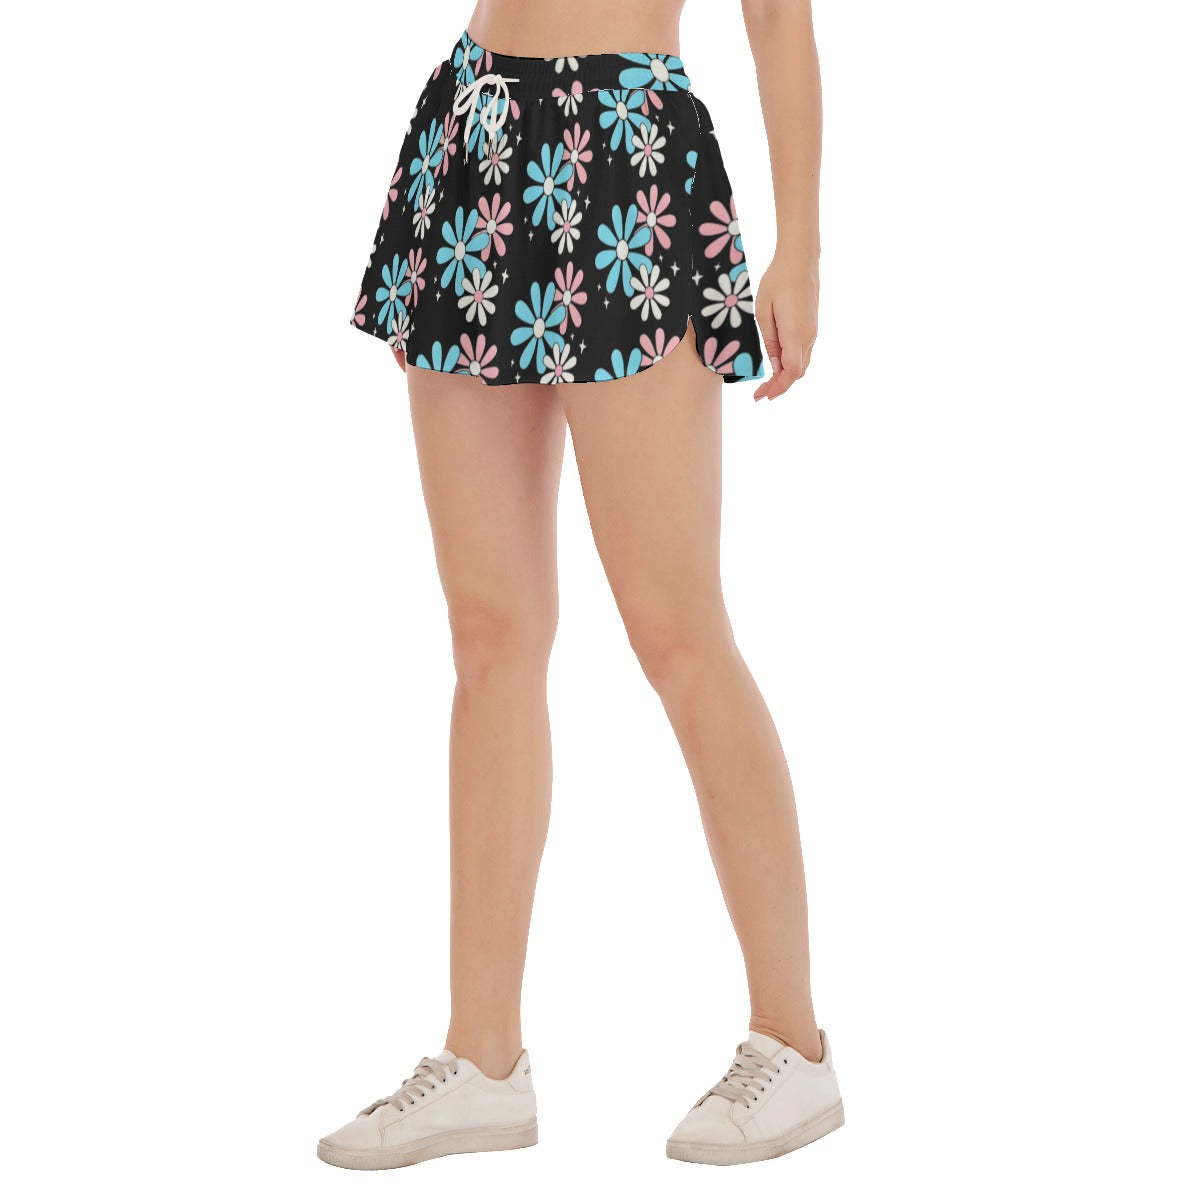 Blue Pink White All Over Big Daisies Black Sports Exercise Skort